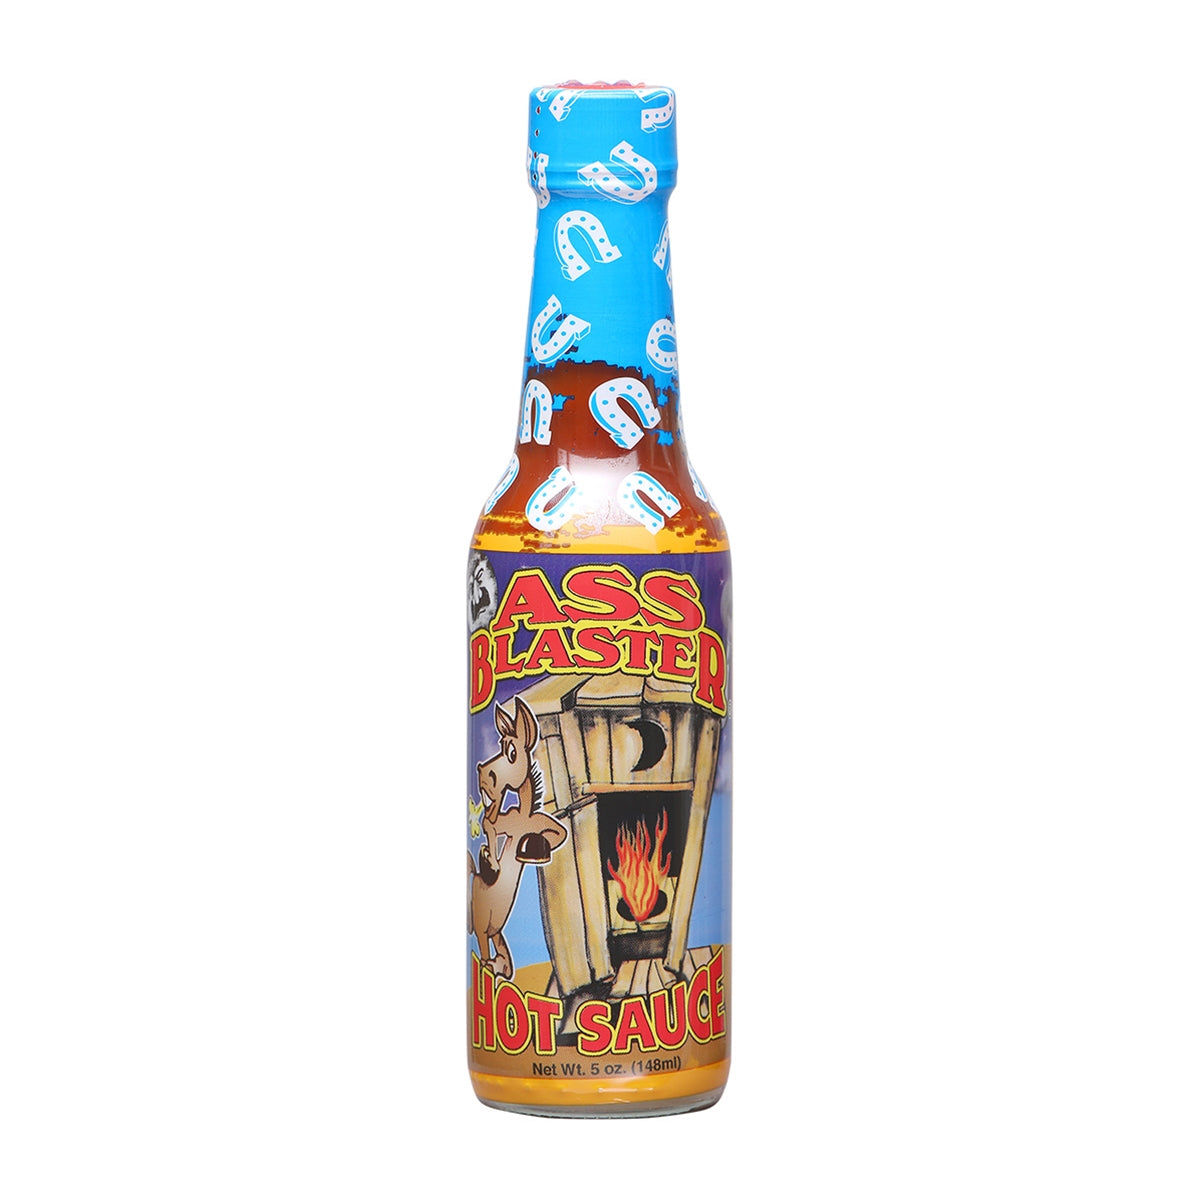 Hot Sauce Ass Blaster In Wooden Outhouse 5 oz Heat 10 Arizona